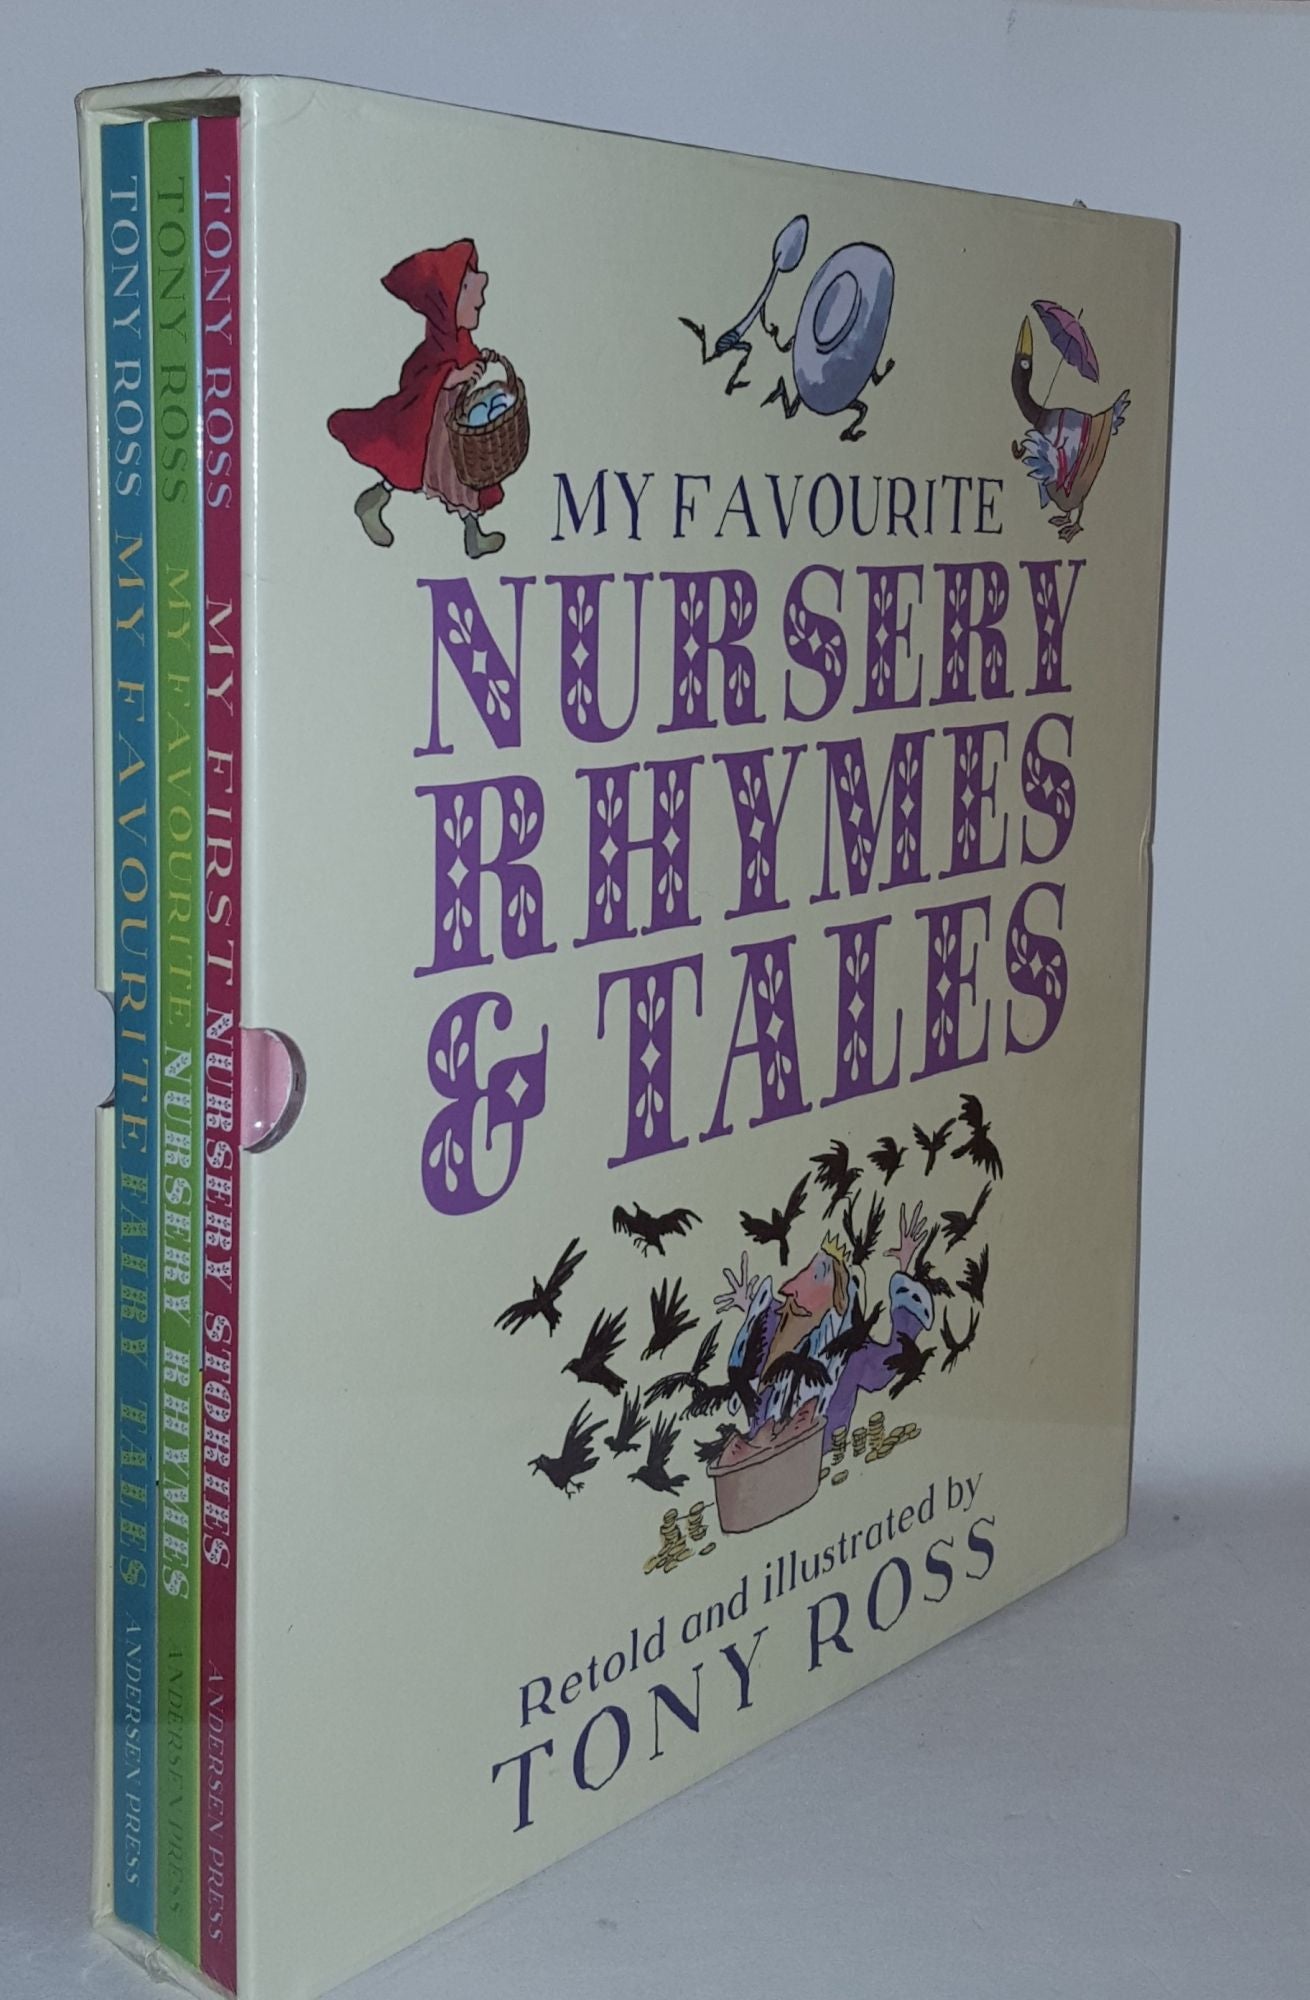 ROSS Tony - My Favourite Nursery Rhymes and Tales